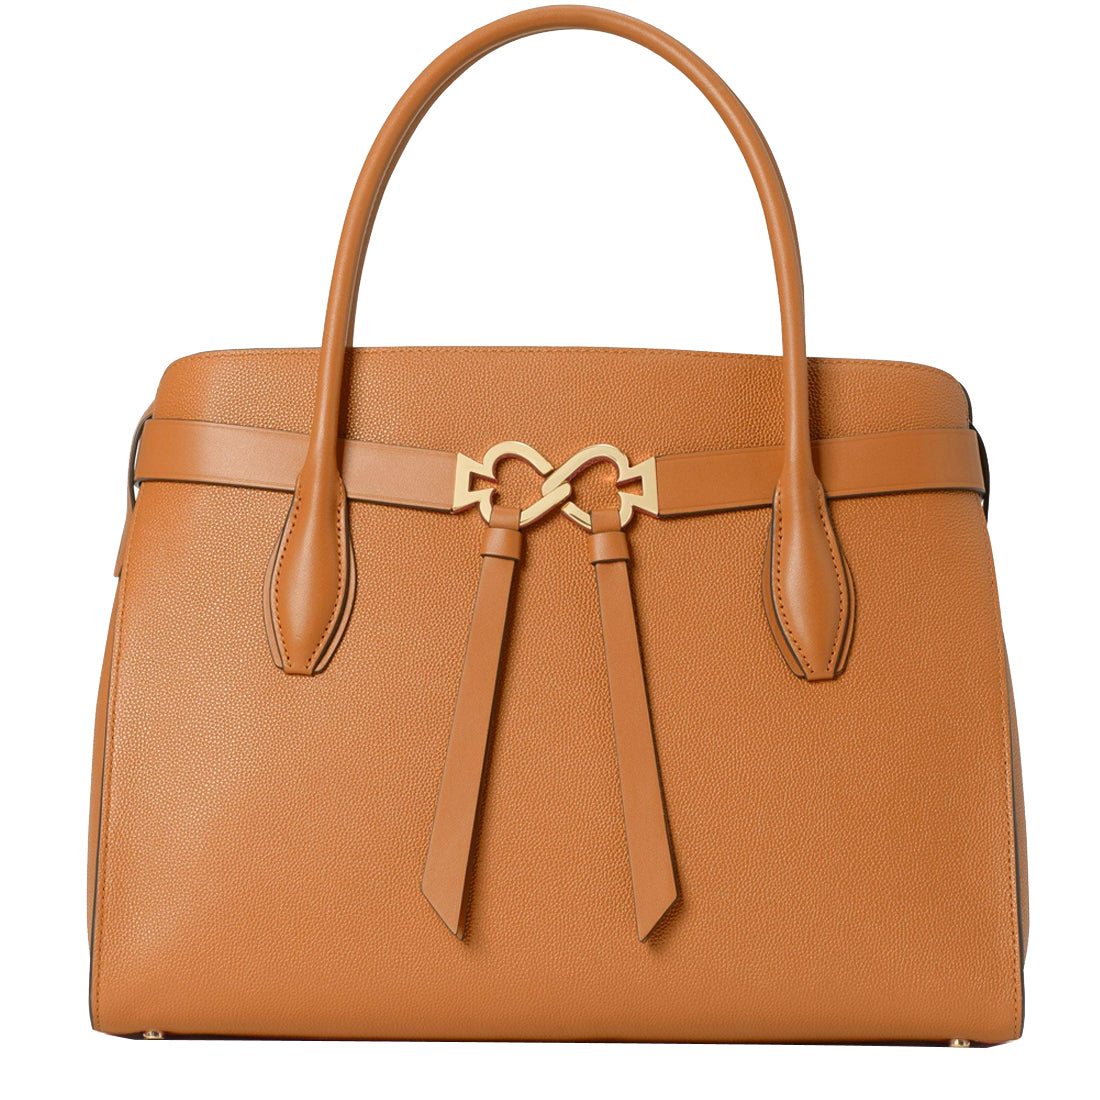 Kate Spade Toujours Large Satchel Bag in Warm Gingerbread – PinkOrchard.com